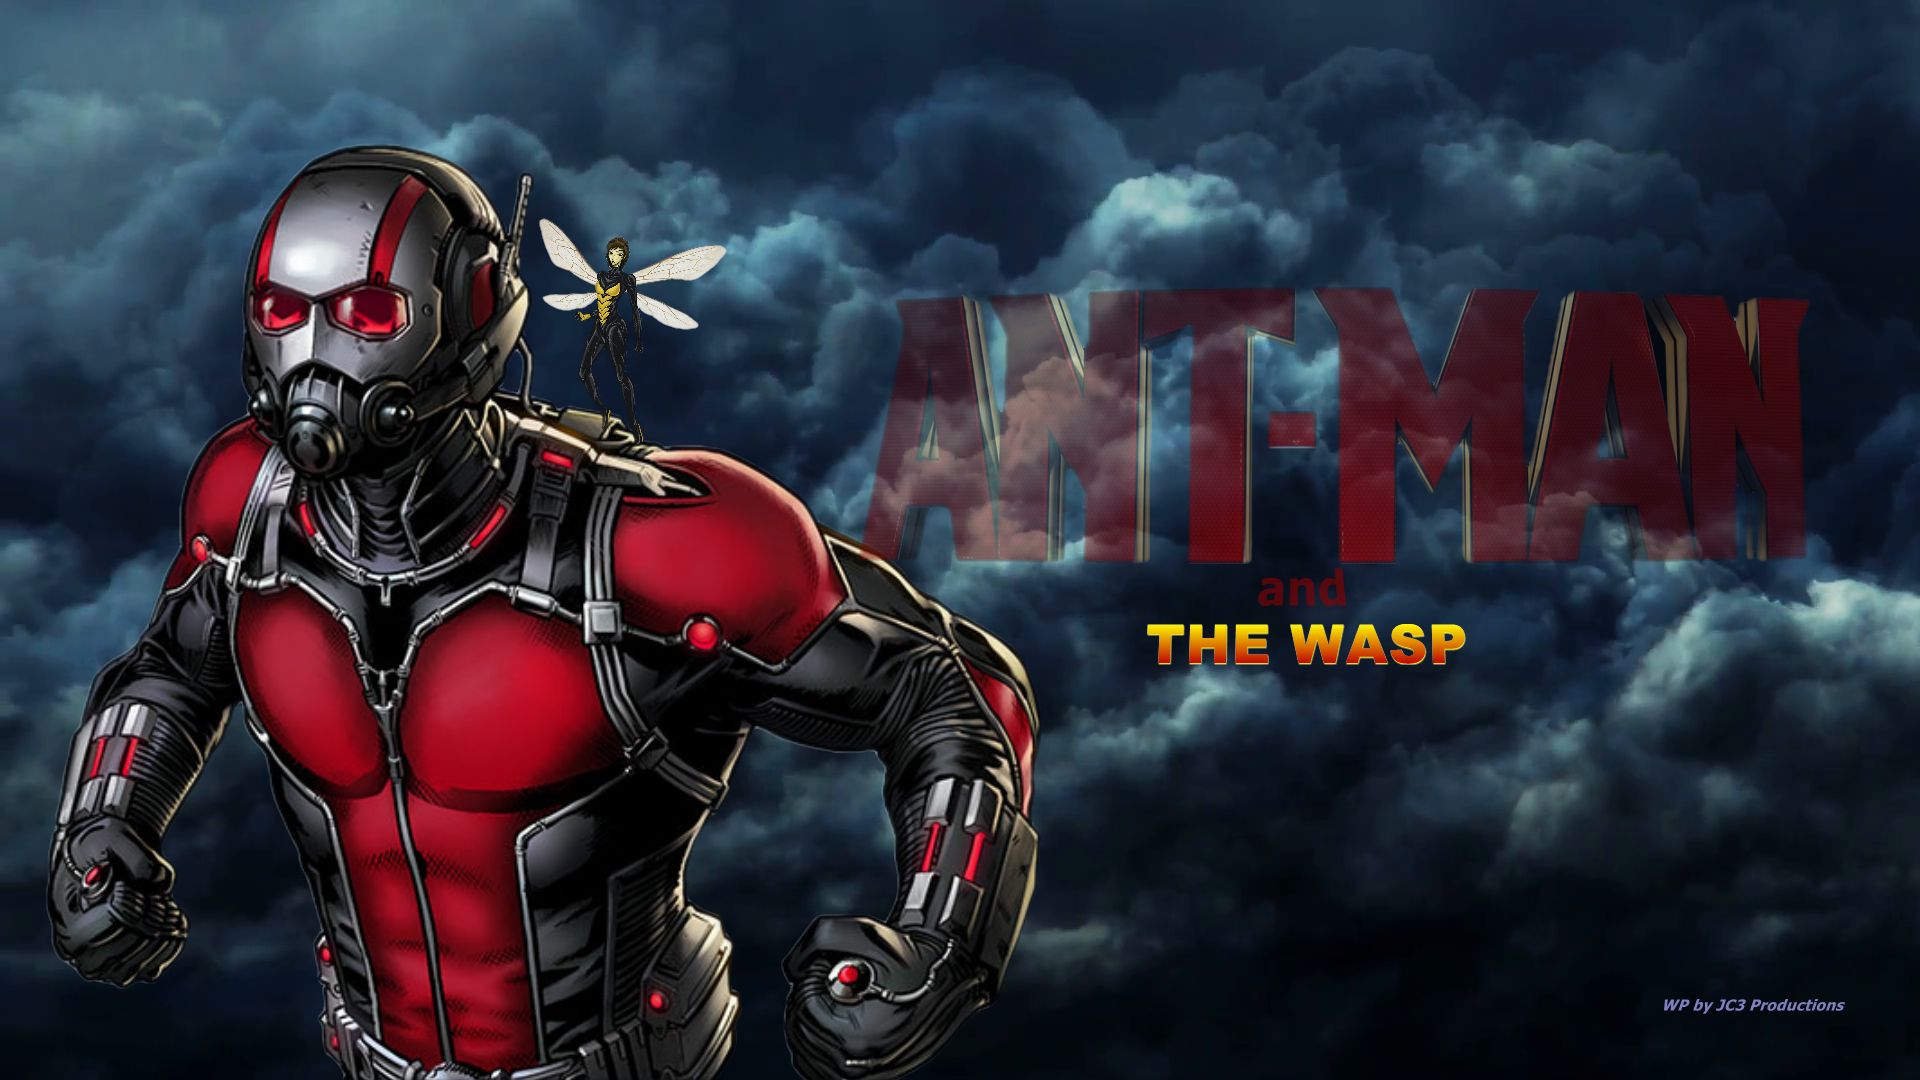 ANT-MAN Wallpaper - The Wasp by Curtdawg53 on DeviantArt